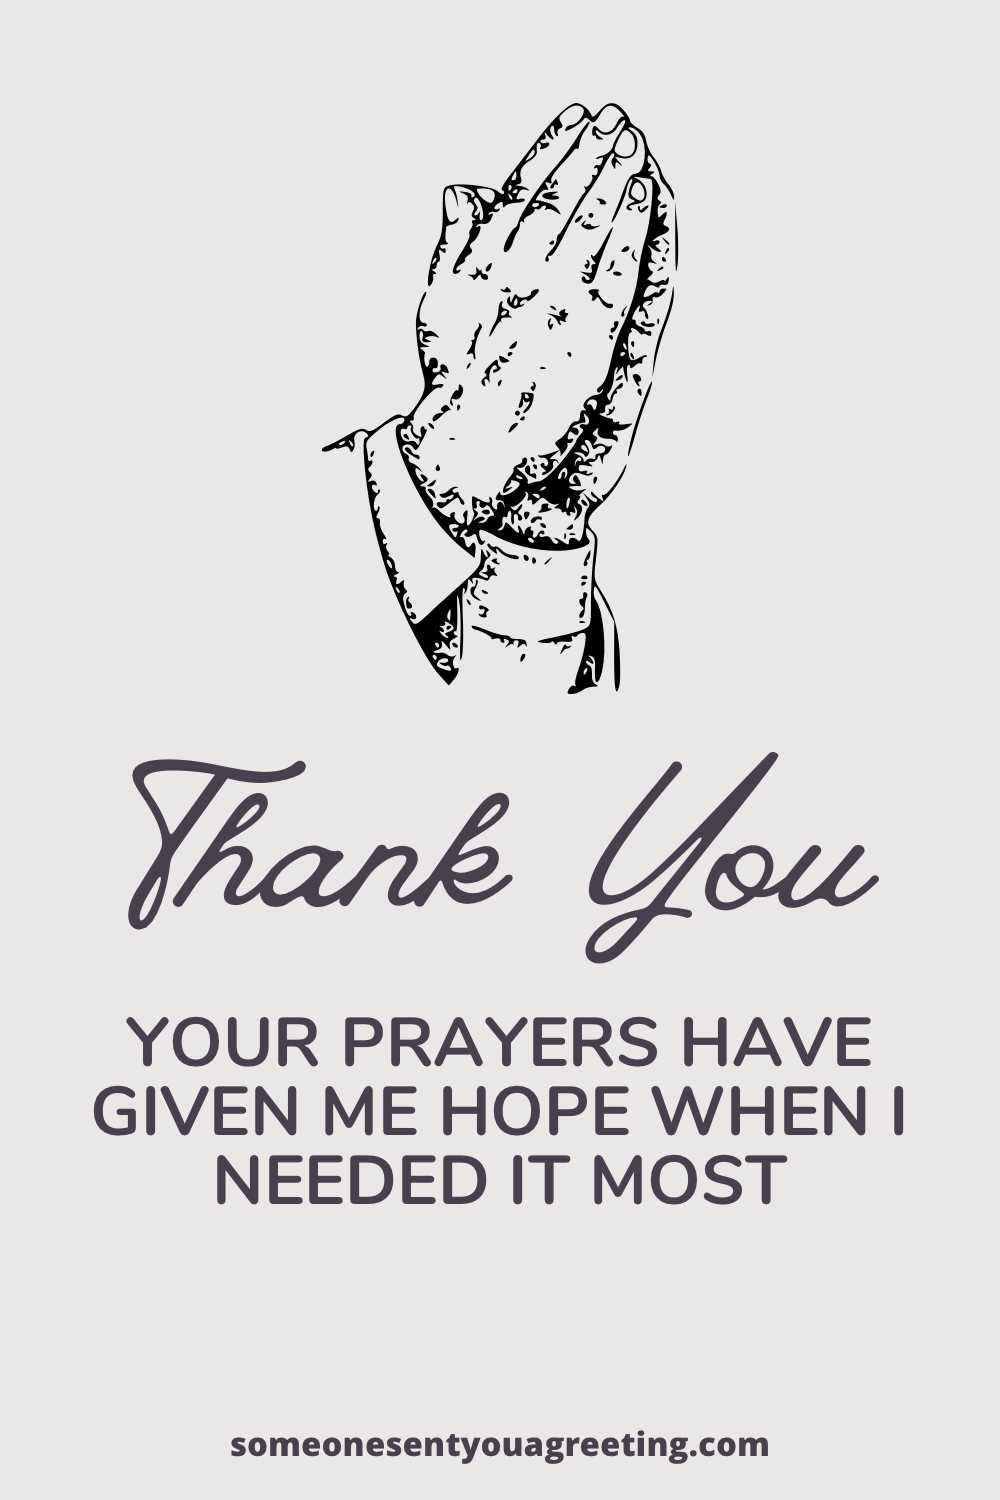 thank you for praying for me